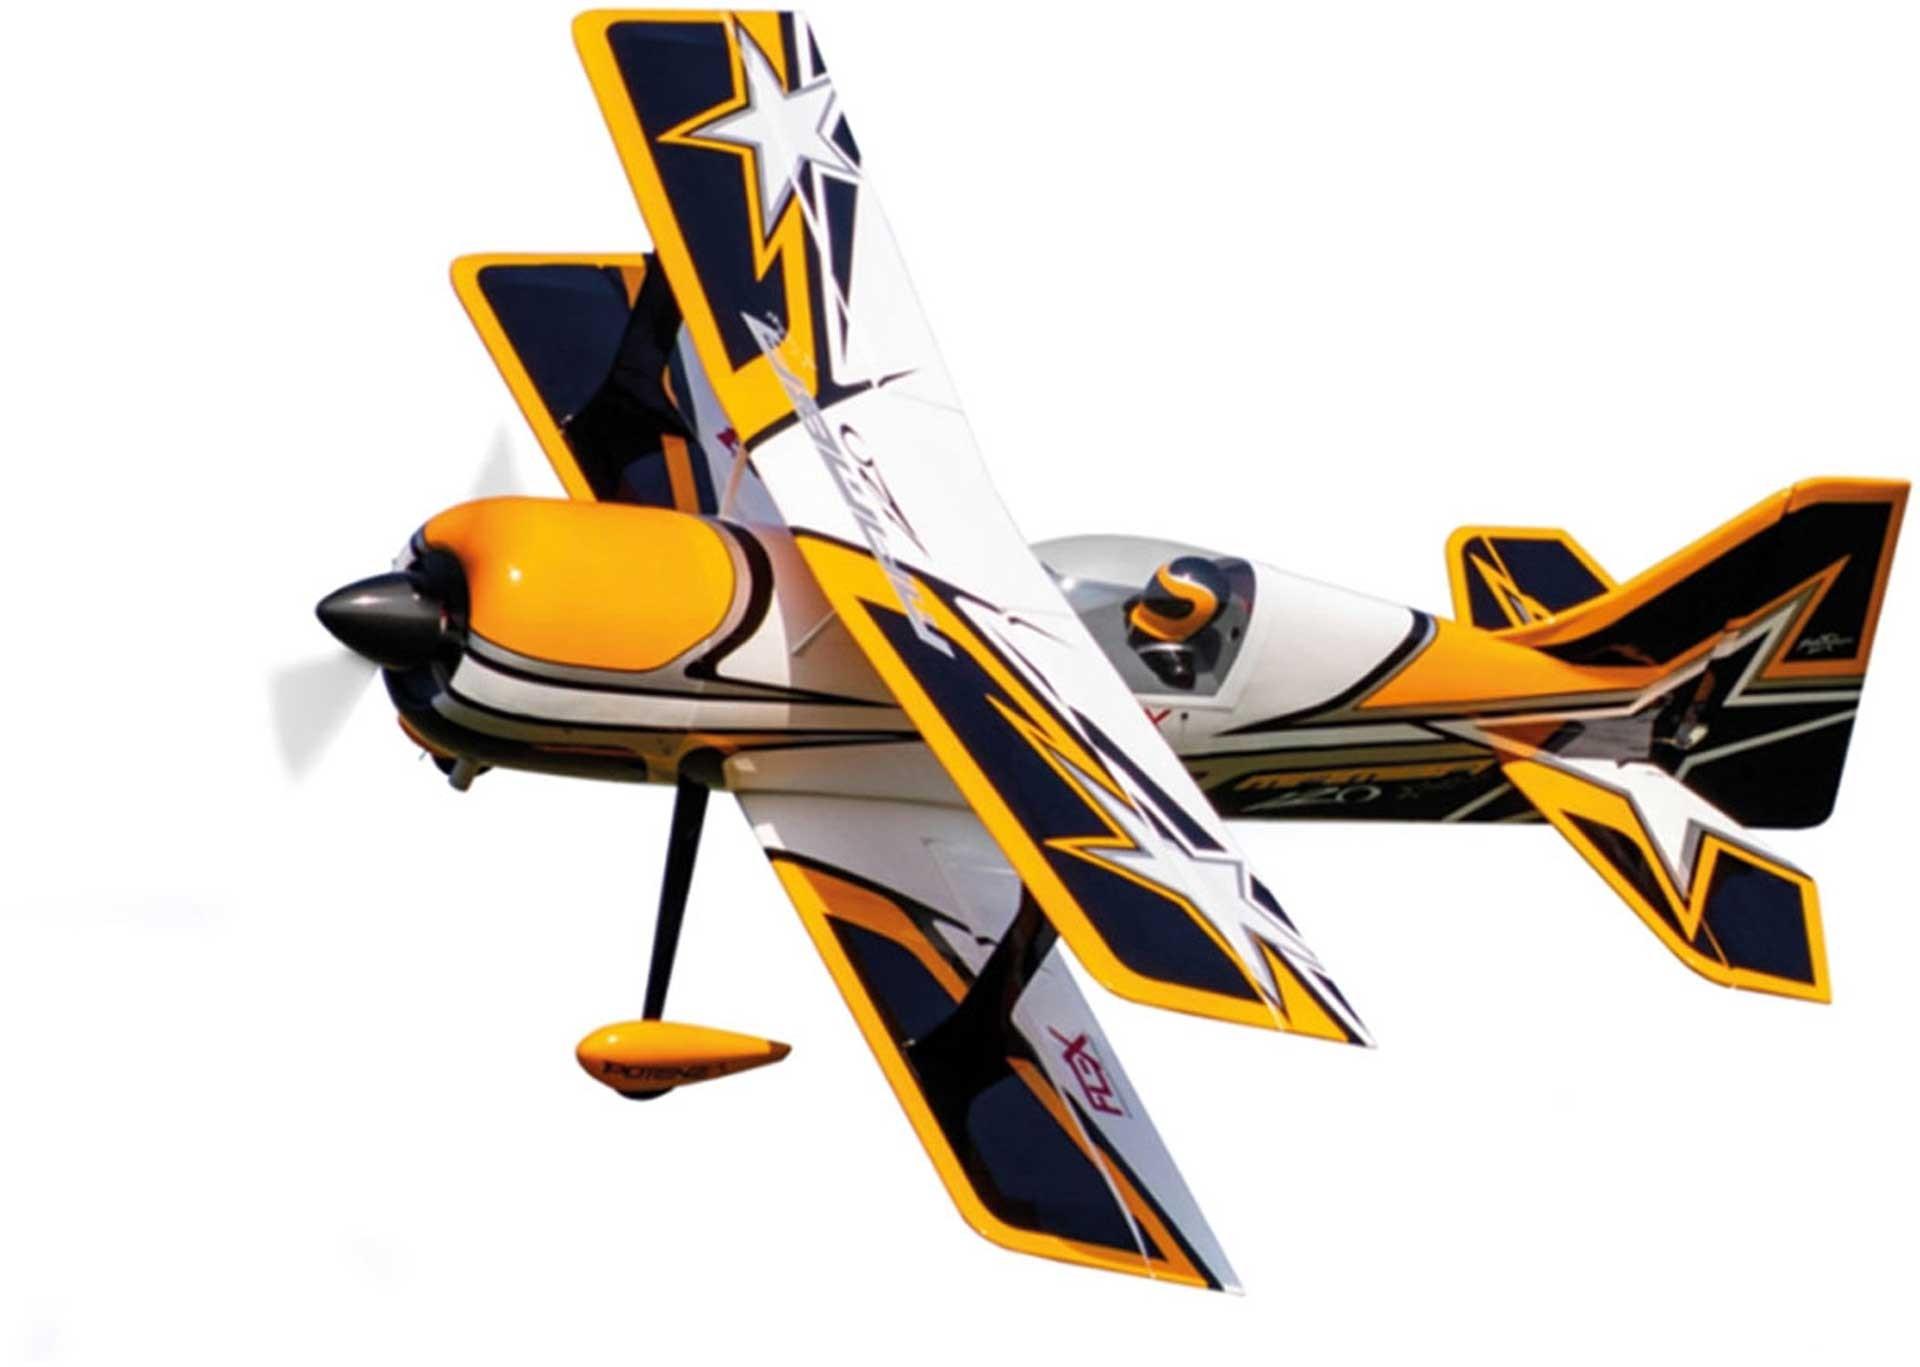 Mamba Rc Plane: Top Features of the Mamba RC Plane